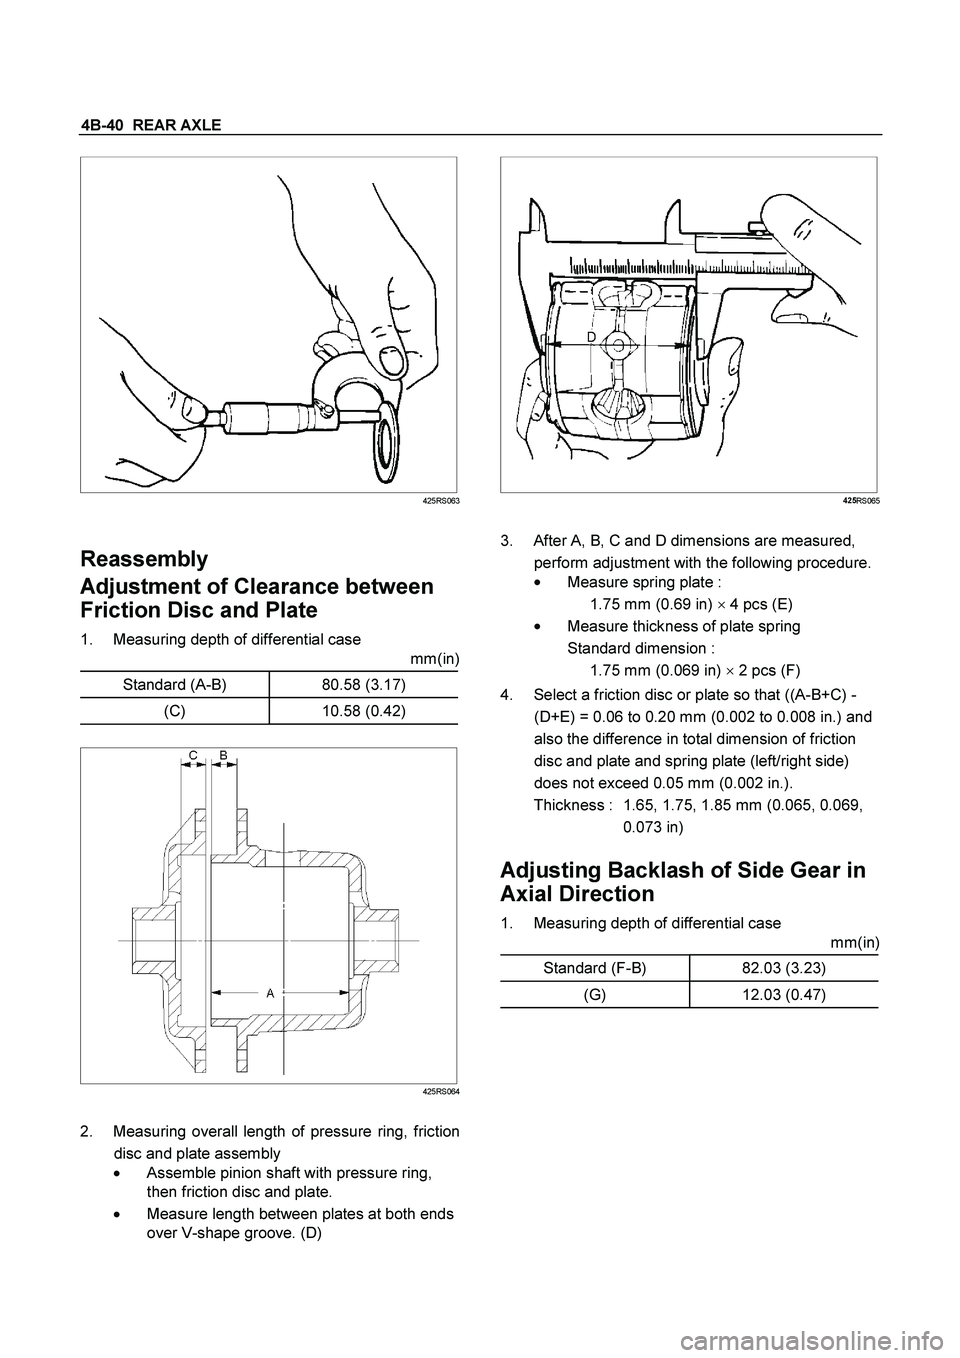 ISUZU TF SERIES 2004  Workshop Manual 4B-40  REAR AXLE
 
 
 
 
425RS063
 
 
Reassembly 
Adjustment of Clearance between 
Friction Disc and Plate 
1.  Measuring depth of differential case 
mm(in)
 
Standard (A-B)  80.58 (3.17) 
(C) 10.58 (